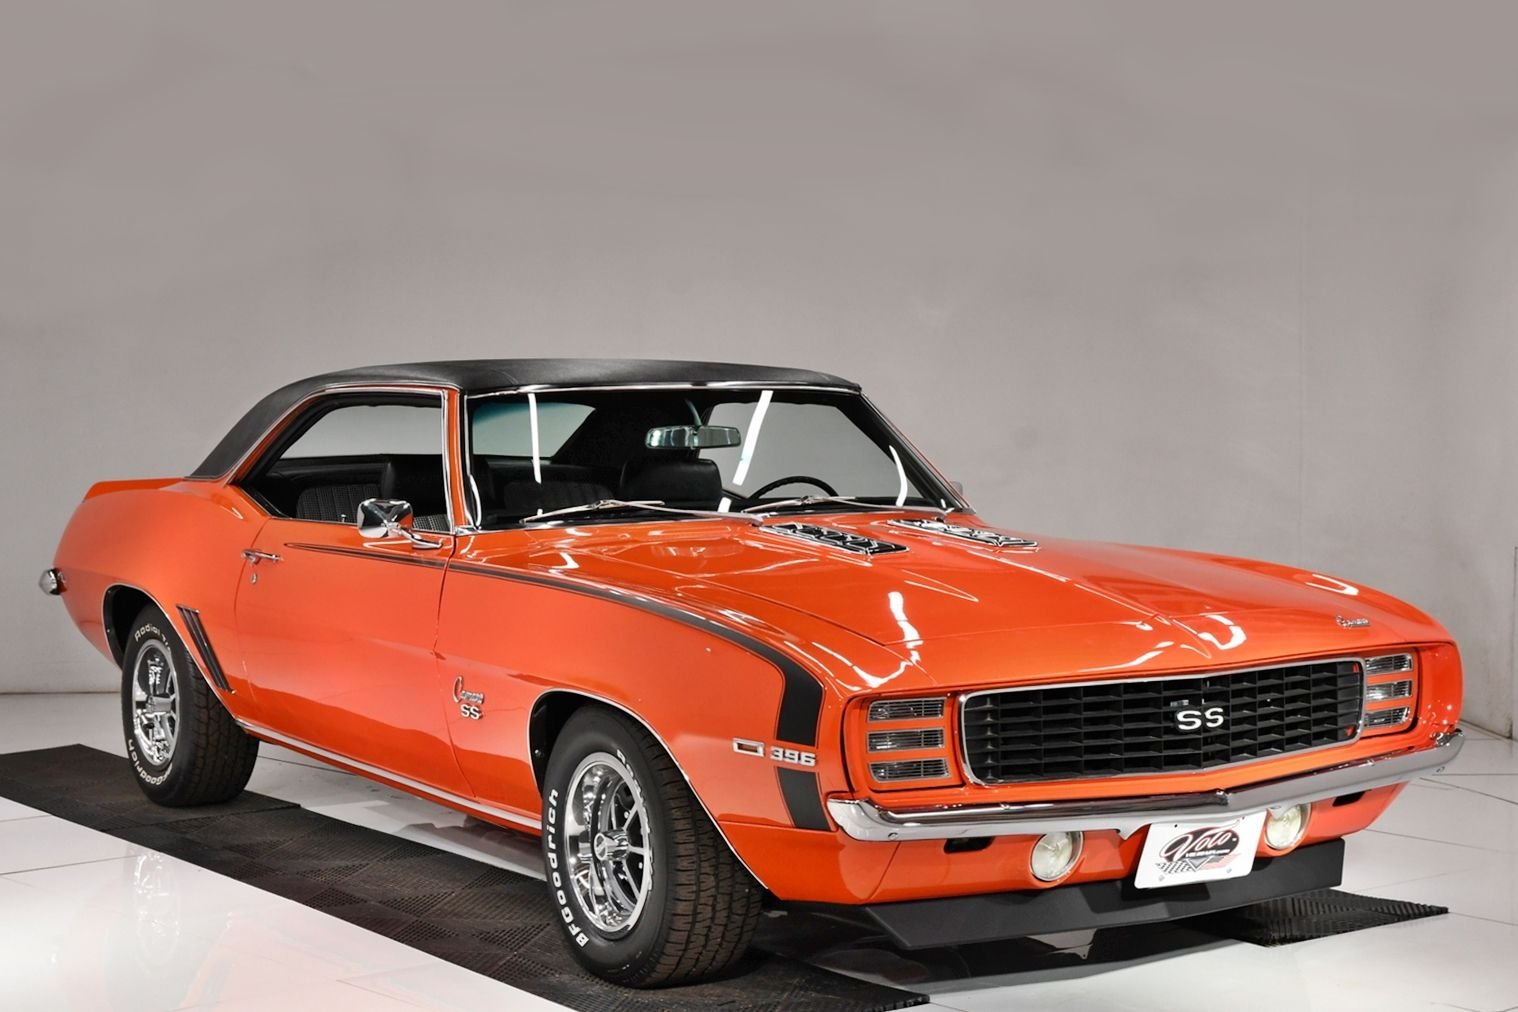 This Restored 1969 Chevrolet Camaro L89 Costs More Than a 2021 Camaro